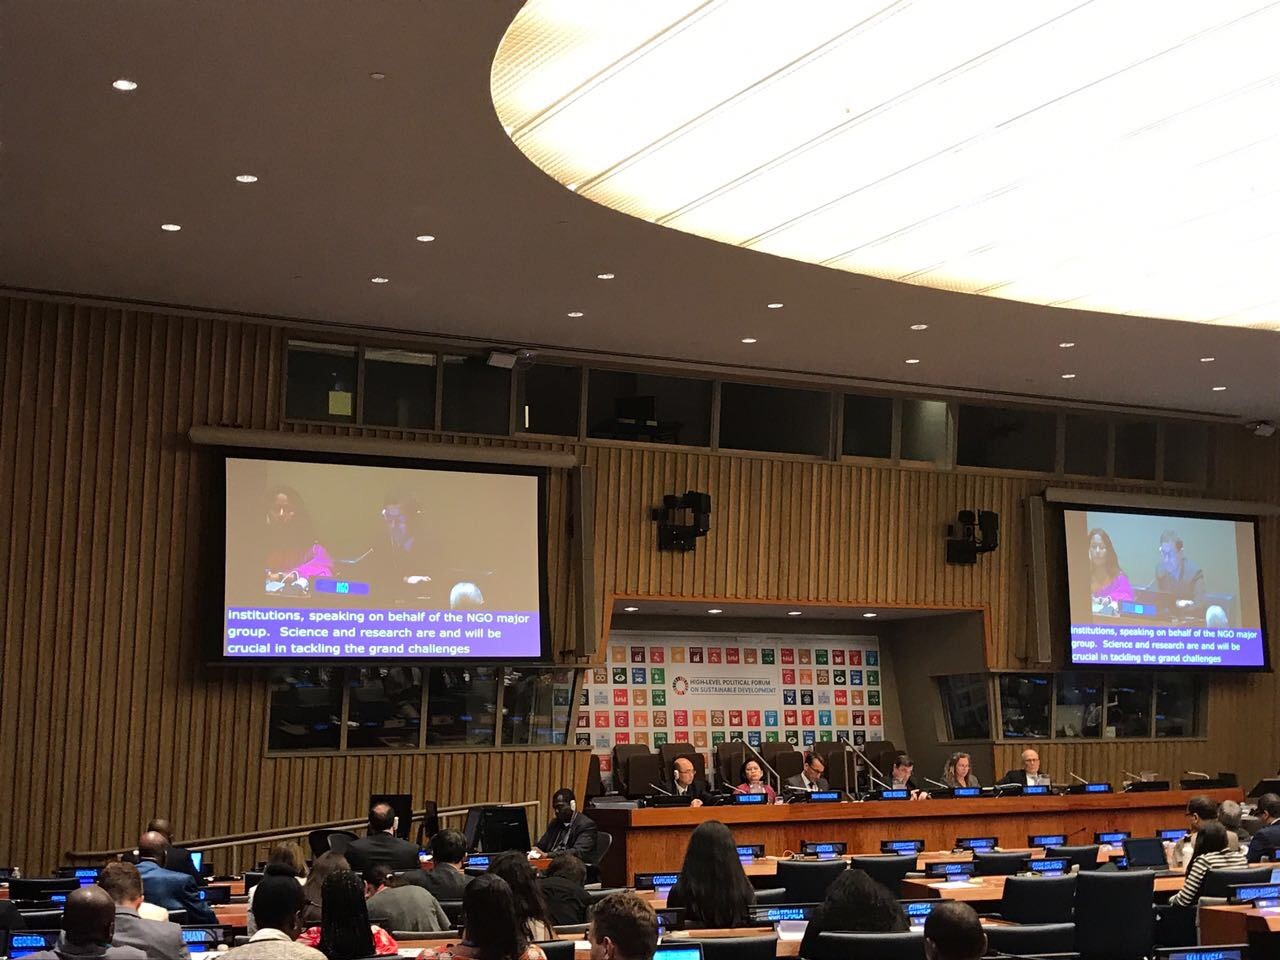 IFLA's intervention at the HLPF session "Science-policy interface and emerging issues" on behalf of the NGO Major Group